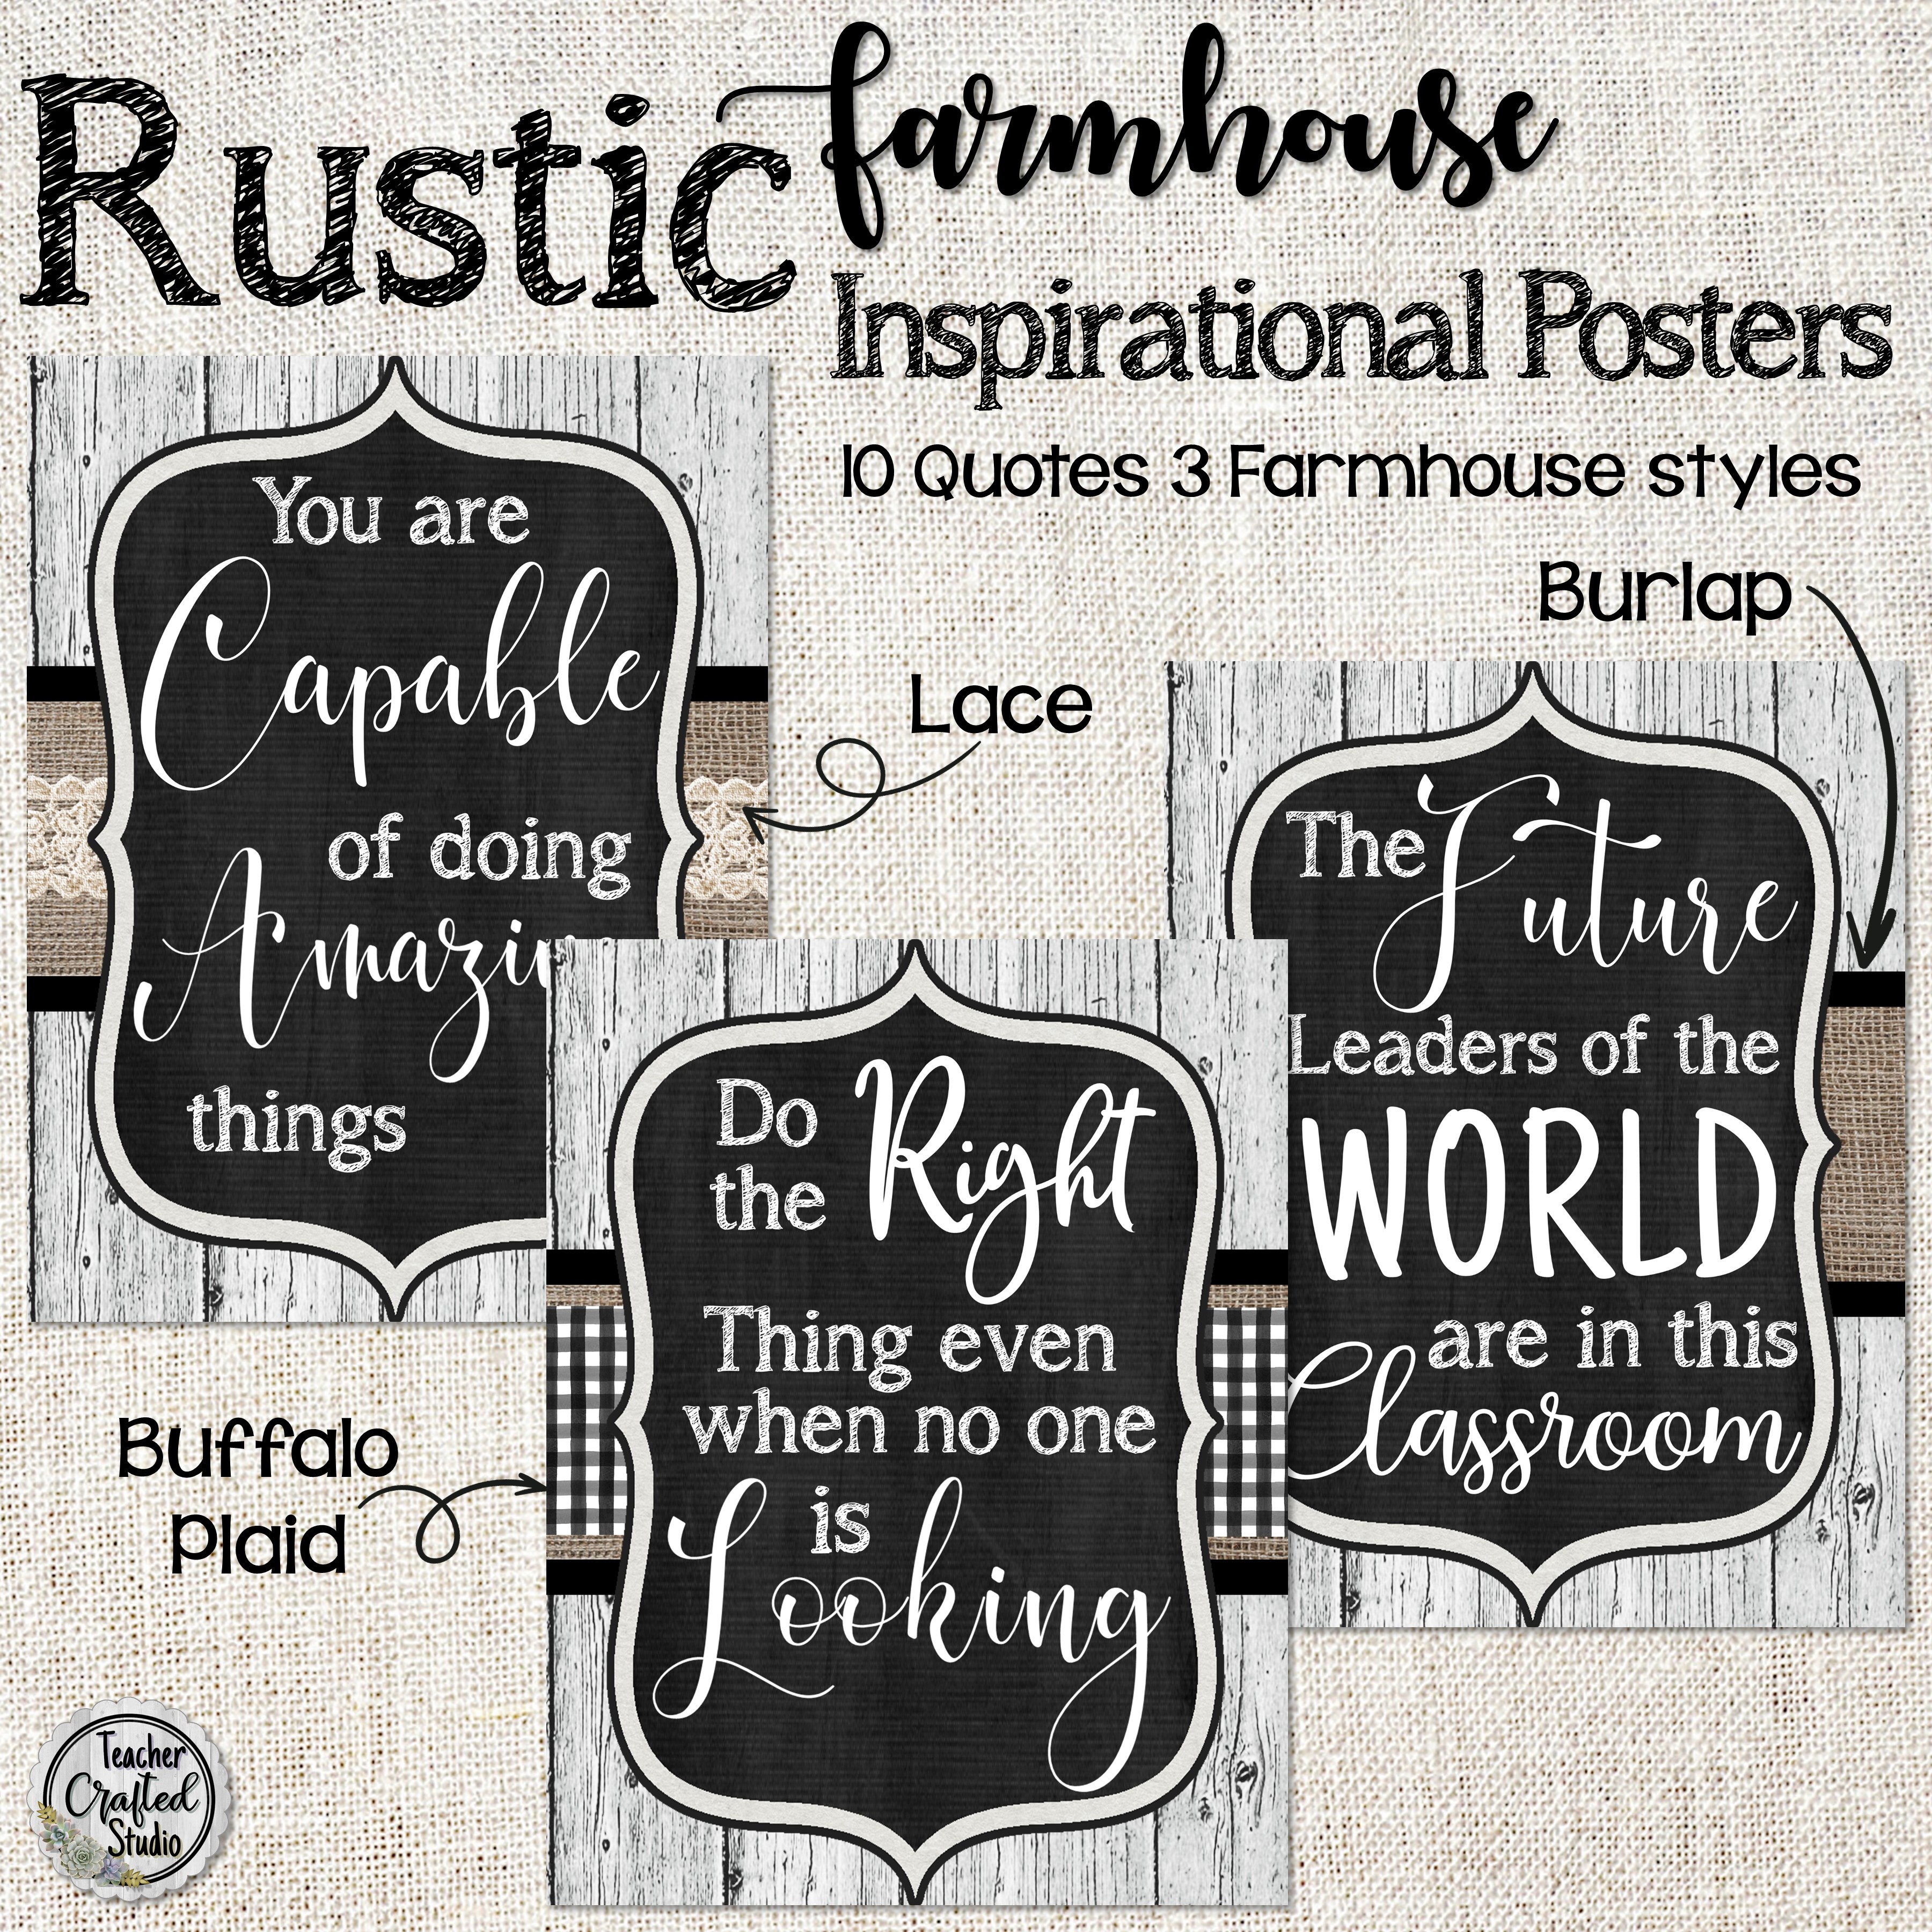 Rustic Farmhouse Inspirational Posters's featured image